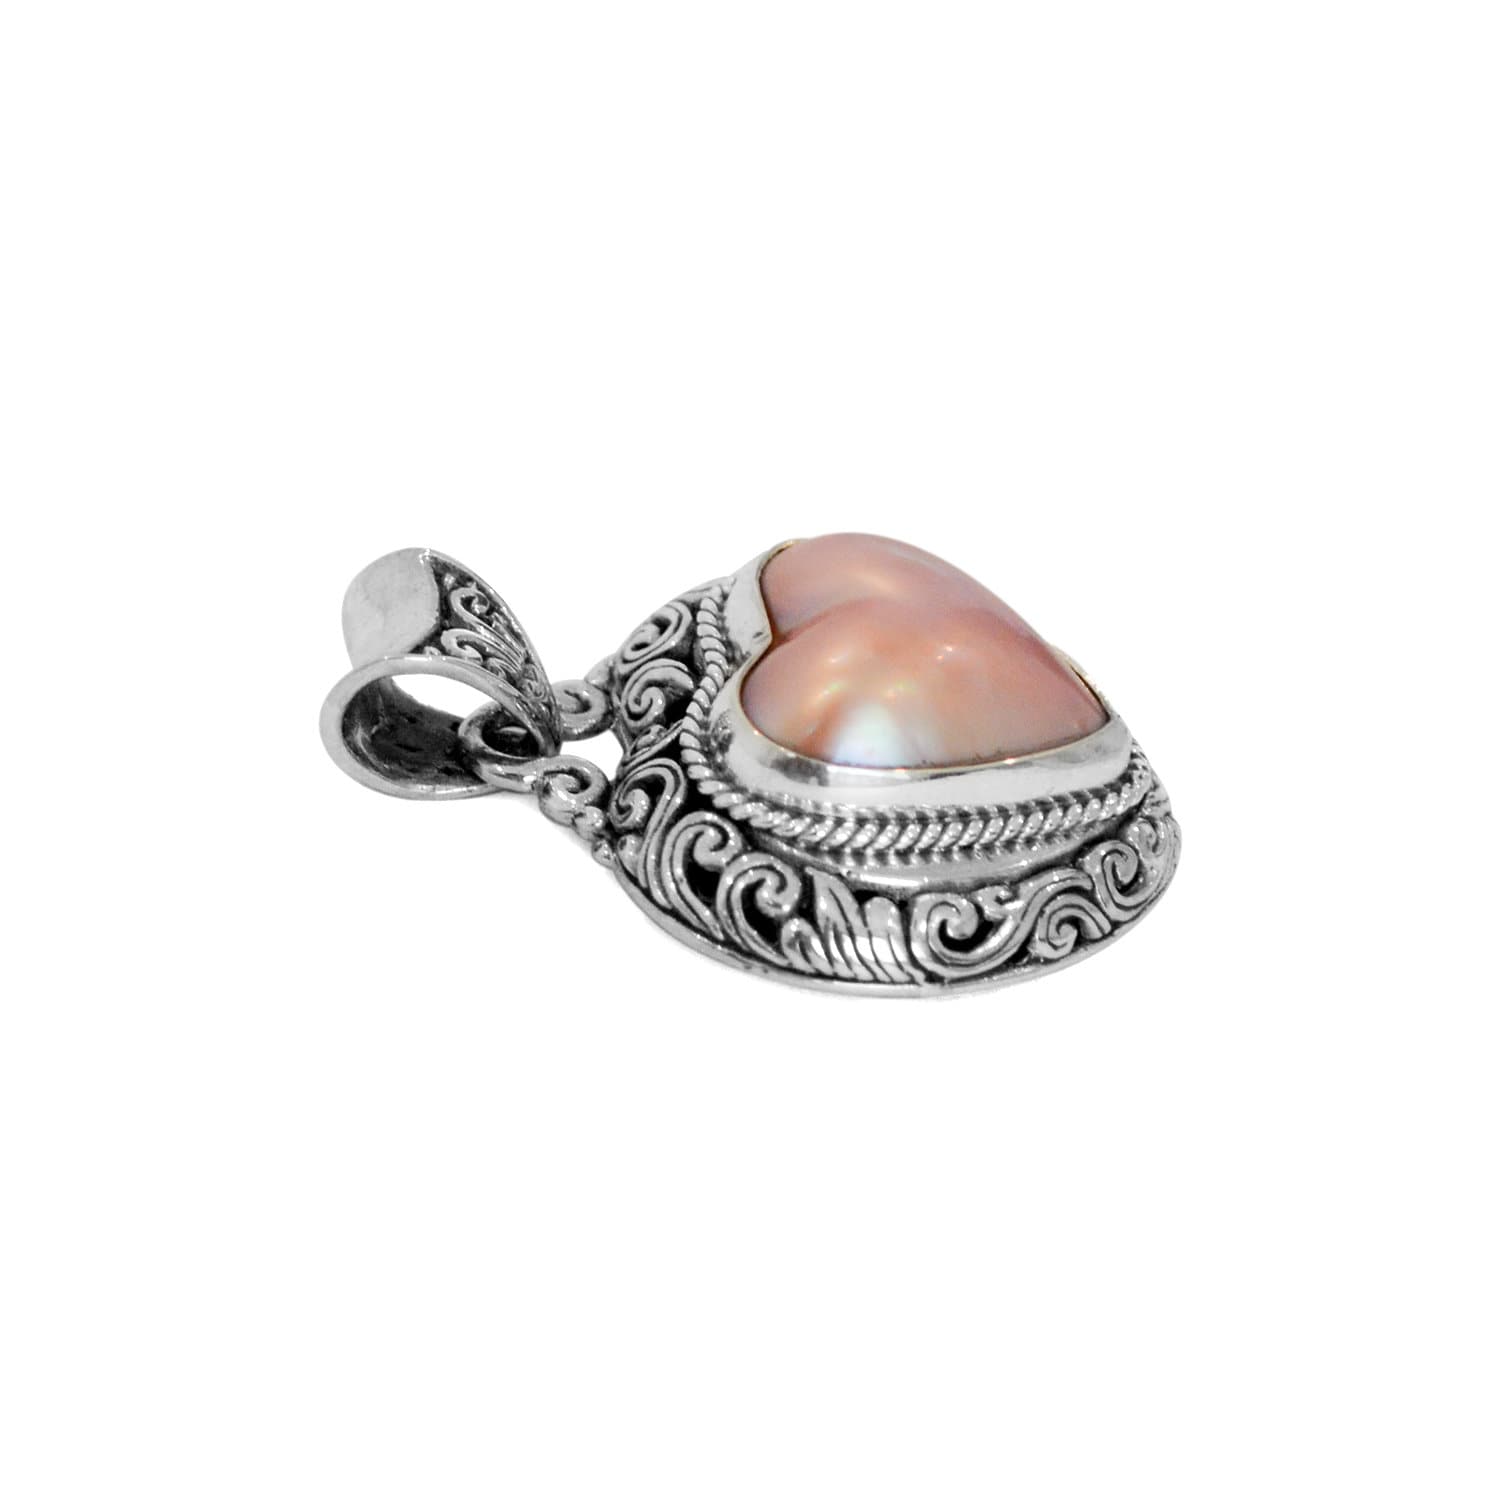 Bali HEART PINK Mabe Pearl Pendant in solid 925 Sterling Silver